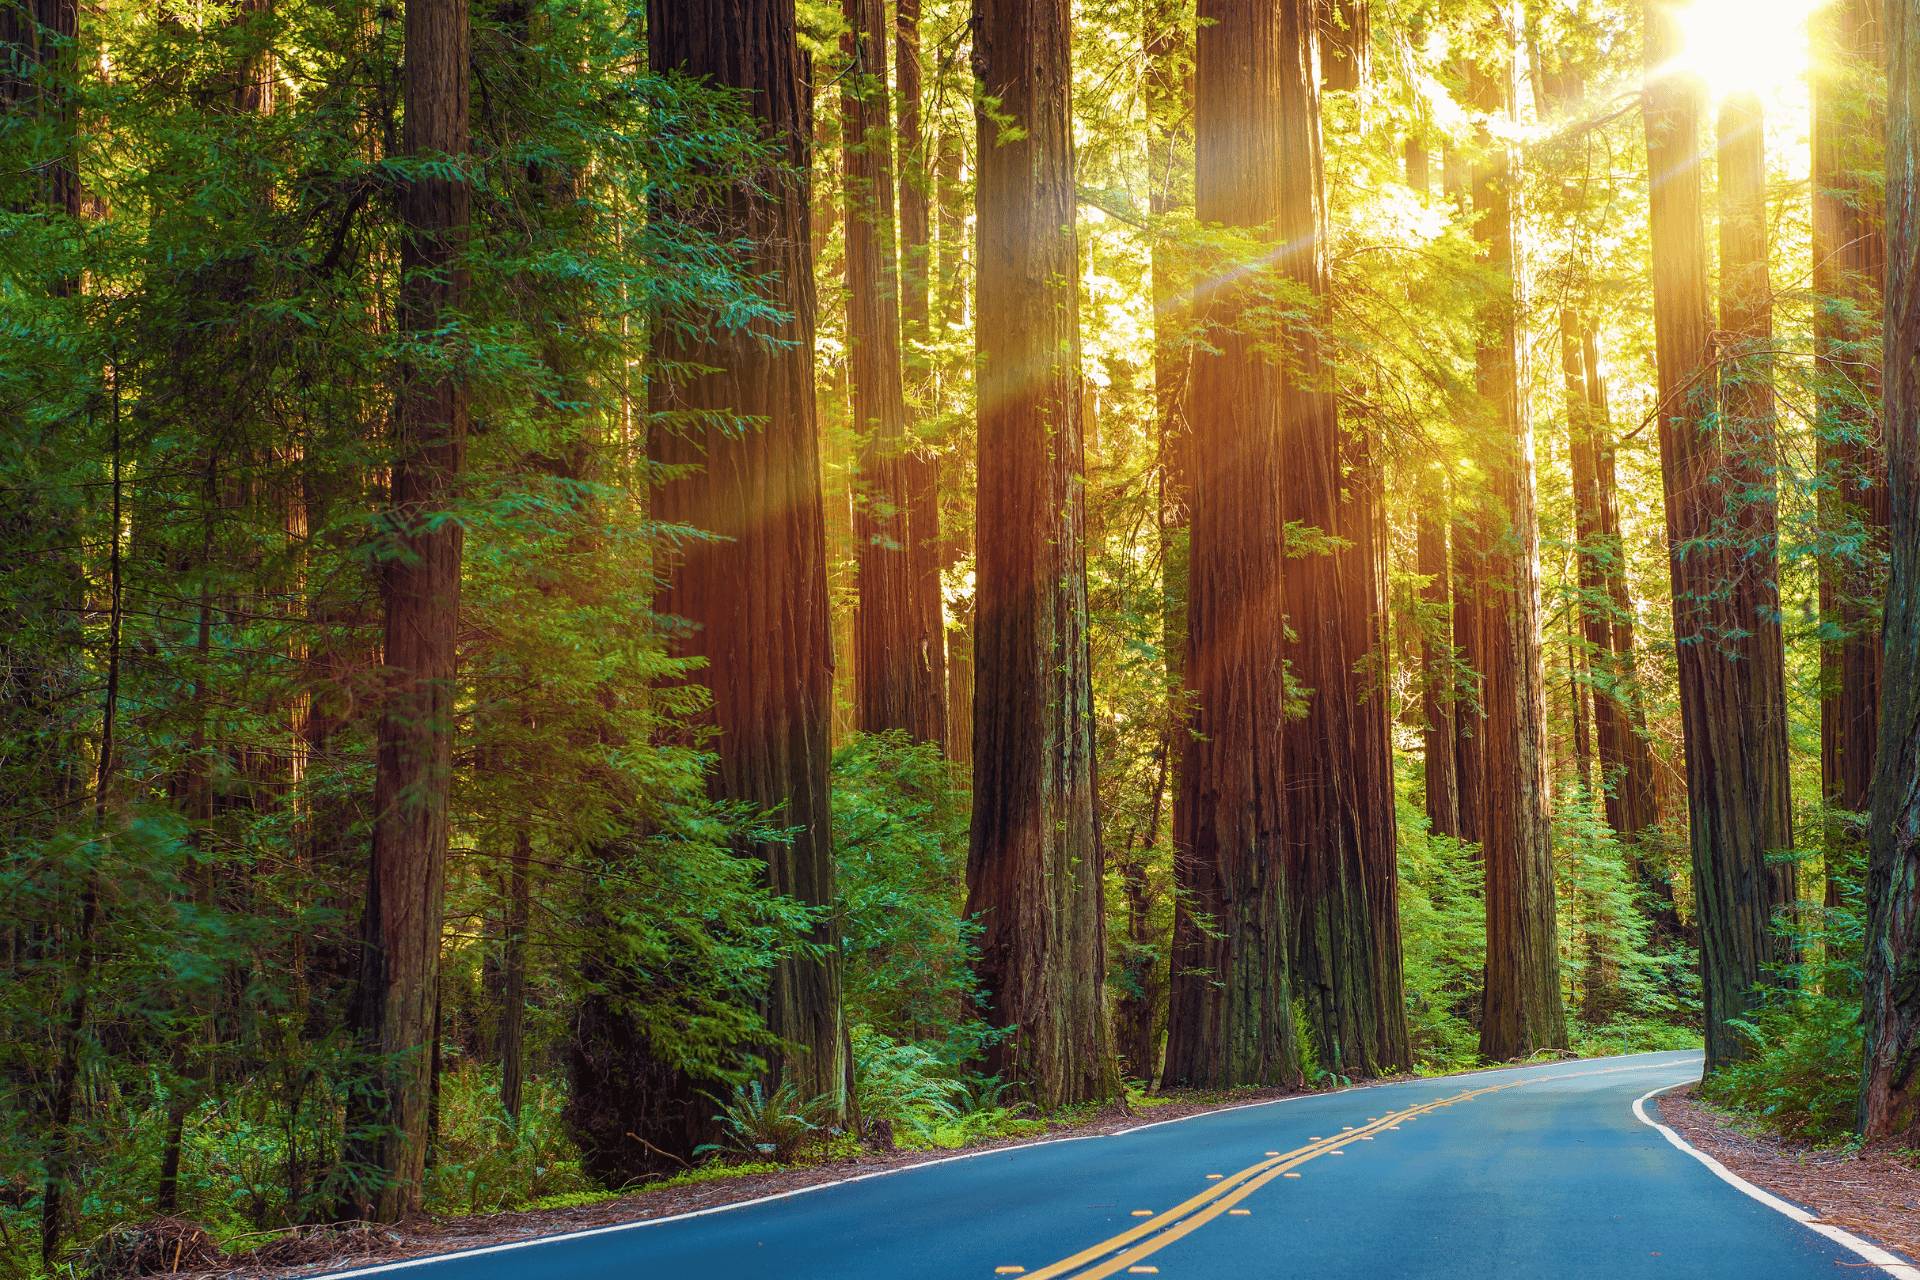 The Redwood national park in California